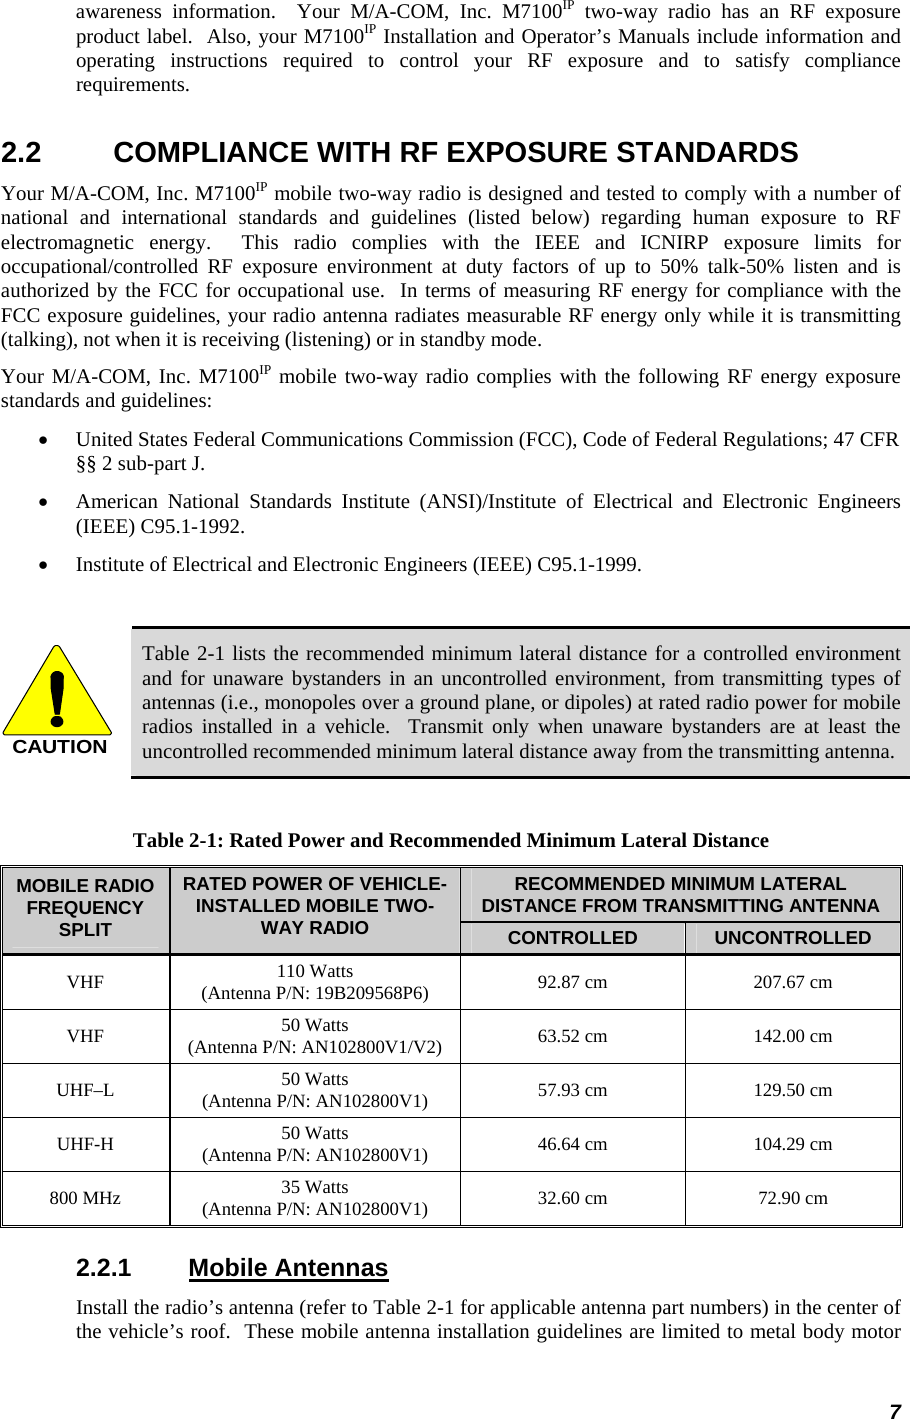 7 awareness information.  Your M/A-COM, Inc. M7100IP two-way radio has an RF exposure product label.  Also, your M7100IP Installation and Operator’s Manuals include information and operating instructions required to control your RF exposure and to satisfy compliance requirements. 2.2  COMPLIANCE WITH RF EXPOSURE STANDARDS Your M/A-COM, Inc. M7100IP mobile two-way radio is designed and tested to comply with a number of national and international standards and guidelines (listed below) regarding human exposure to RF electromagnetic energy.  This radio complies with the IEEE and ICNIRP exposure limits for occupational/controlled RF exposure environment at duty factors of up to 50% talk-50% listen and is authorized by the FCC for occupational use.  In terms of measuring RF energy for compliance with the FCC exposure guidelines, your radio antenna radiates measurable RF energy only while it is transmitting (talking), not when it is receiving (listening) or in standby mode. Your M/A-COM, Inc. M7100IP mobile two-way radio complies with the following RF energy exposure standards and guidelines: • United States Federal Communications Commission (FCC), Code of Federal Regulations; 47 CFR §§ 2 sub-part J. • American National Standards Institute (ANSI)/Institute of Electrical and Electronic Engineers (IEEE) C95.1-1992. • Institute of Electrical and Electronic Engineers (IEEE) C95.1-1999.  CAUTION Table 2-1 lists the recommended minimum lateral distance for a controlled environment and for unaware bystanders in an uncontrolled environment, from transmitting types of antennas (i.e., monopoles over a ground plane, or dipoles) at rated radio power for mobile radios installed in a vehicle.  Transmit only when unaware bystanders are at least the uncontrolled recommended minimum lateral distance away from the transmitting antenna.  Table 2-1: Rated Power and Recommended Minimum Lateral Distance RECOMMENDED MINIMUM LATERAL DISTANCE FROM TRANSMITTING ANTENNA MOBILE RADIO FREQUENCY SPLIT RATED POWER OF VEHICLE-INSTALLED MOBILE TWO-WAY RADIO  CONTROLLED  UNCONTROLLED VHF  110 Watts (Antenna P/N: 19B209568P6)  92.87 cm  207.67 cm VHF  50 Watts (Antenna P/N: AN102800V1/V2)  63.52 cm  142.00 cm UHF–L  50 Watts (Antenna P/N: AN102800V1)  57.93 cm  129.50 cm UHF-H  50 Watts (Antenna P/N: AN102800V1)  46.64 cm  104.29 cm 800 MHz  35 Watts (Antenna P/N: AN102800V1)  32.60 cm  72.90 cm 2.2.1 Mobile Antennas Install the radio’s antenna (refer to Table 2-1 for applicable antenna part numbers) in the center of the vehicle’s roof.  These mobile antenna installation guidelines are limited to metal body motor 